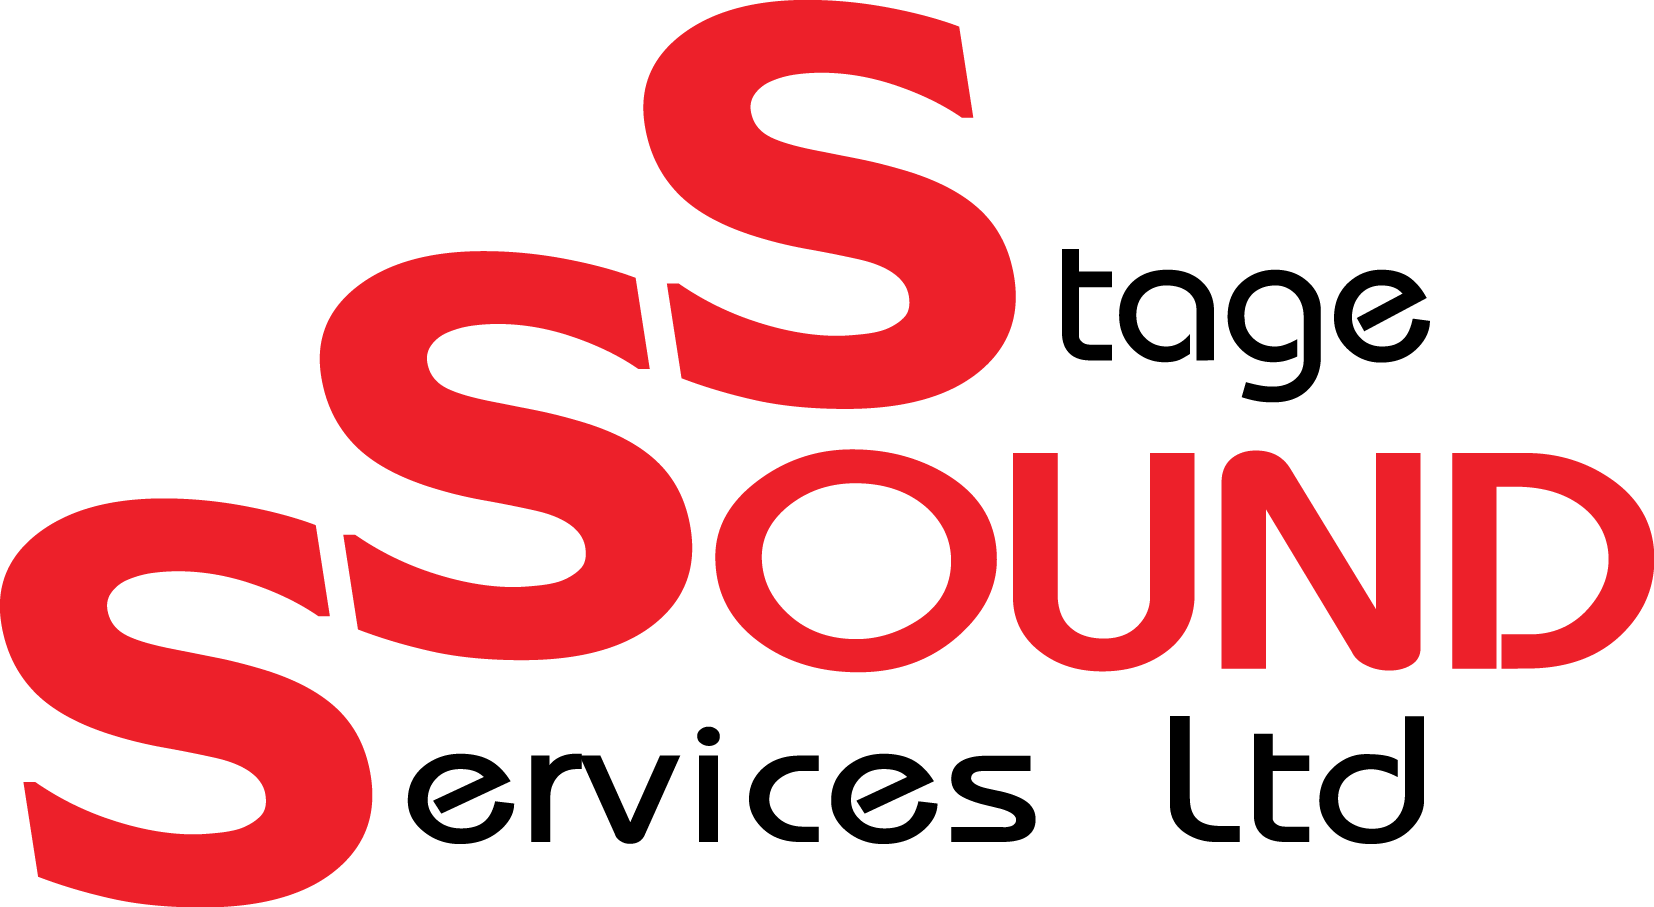 logo for Stage Sound Services